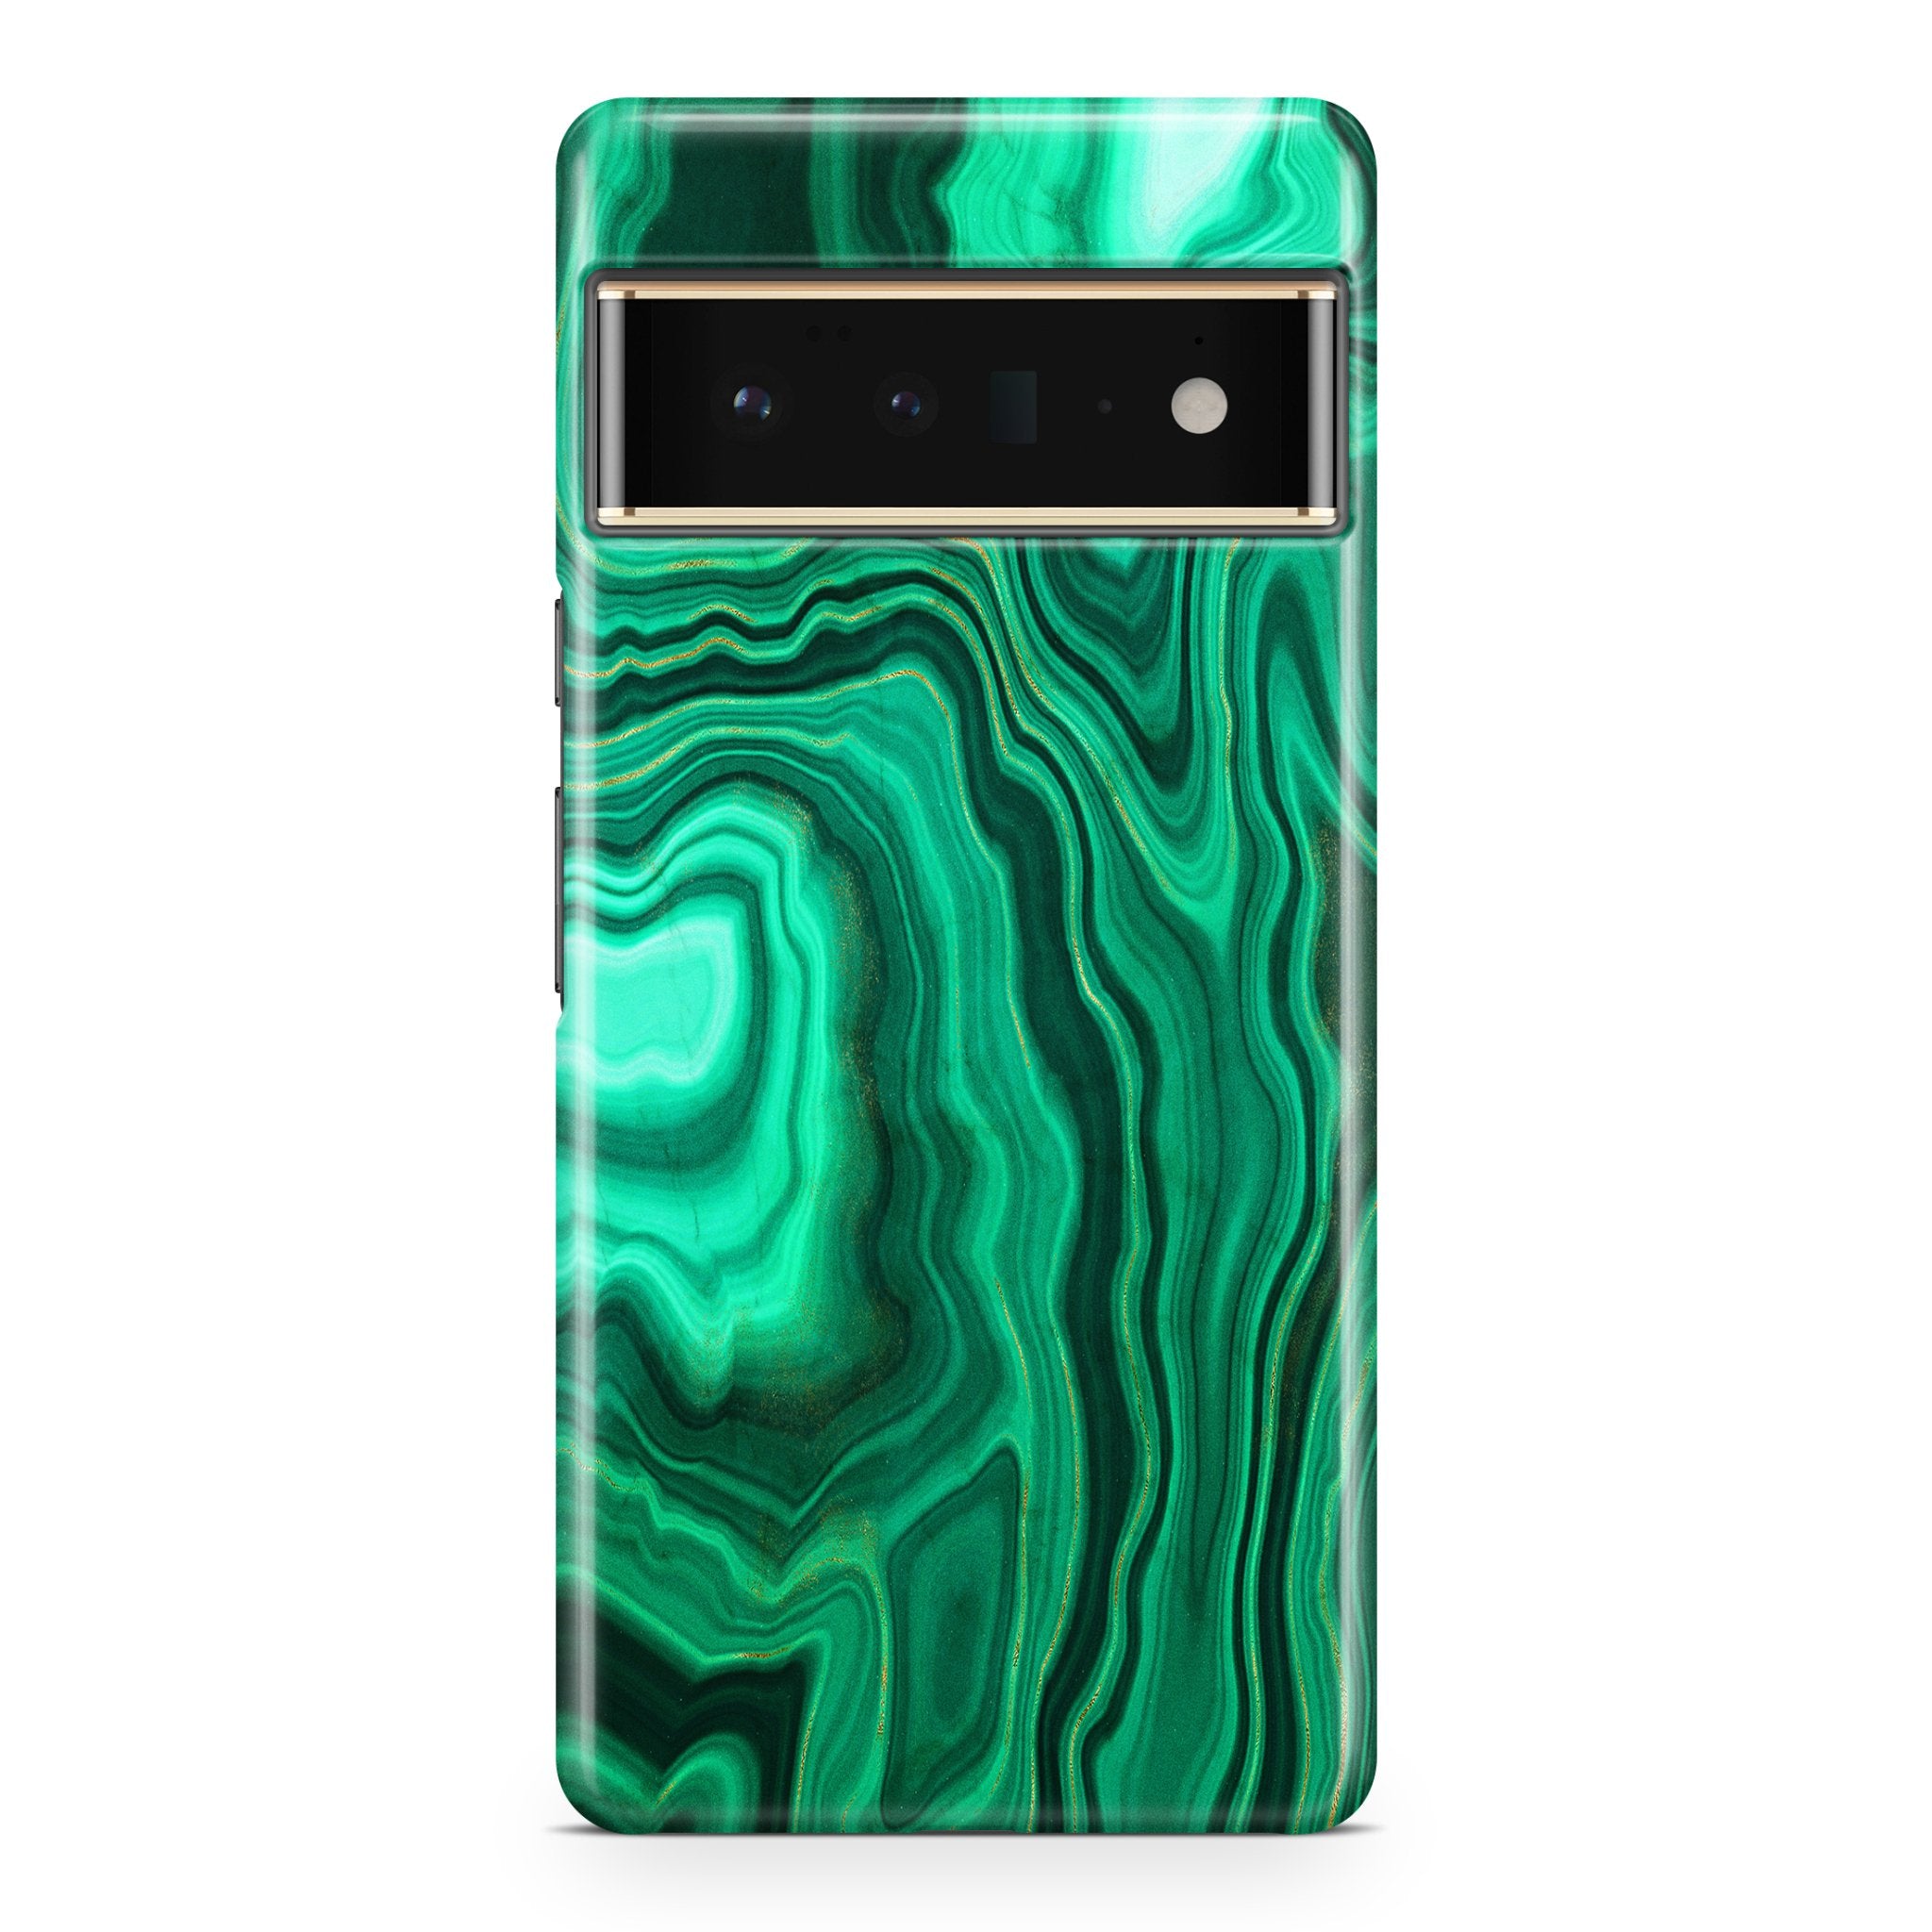 Malachite I - Google phone case designs by CaseSwagger